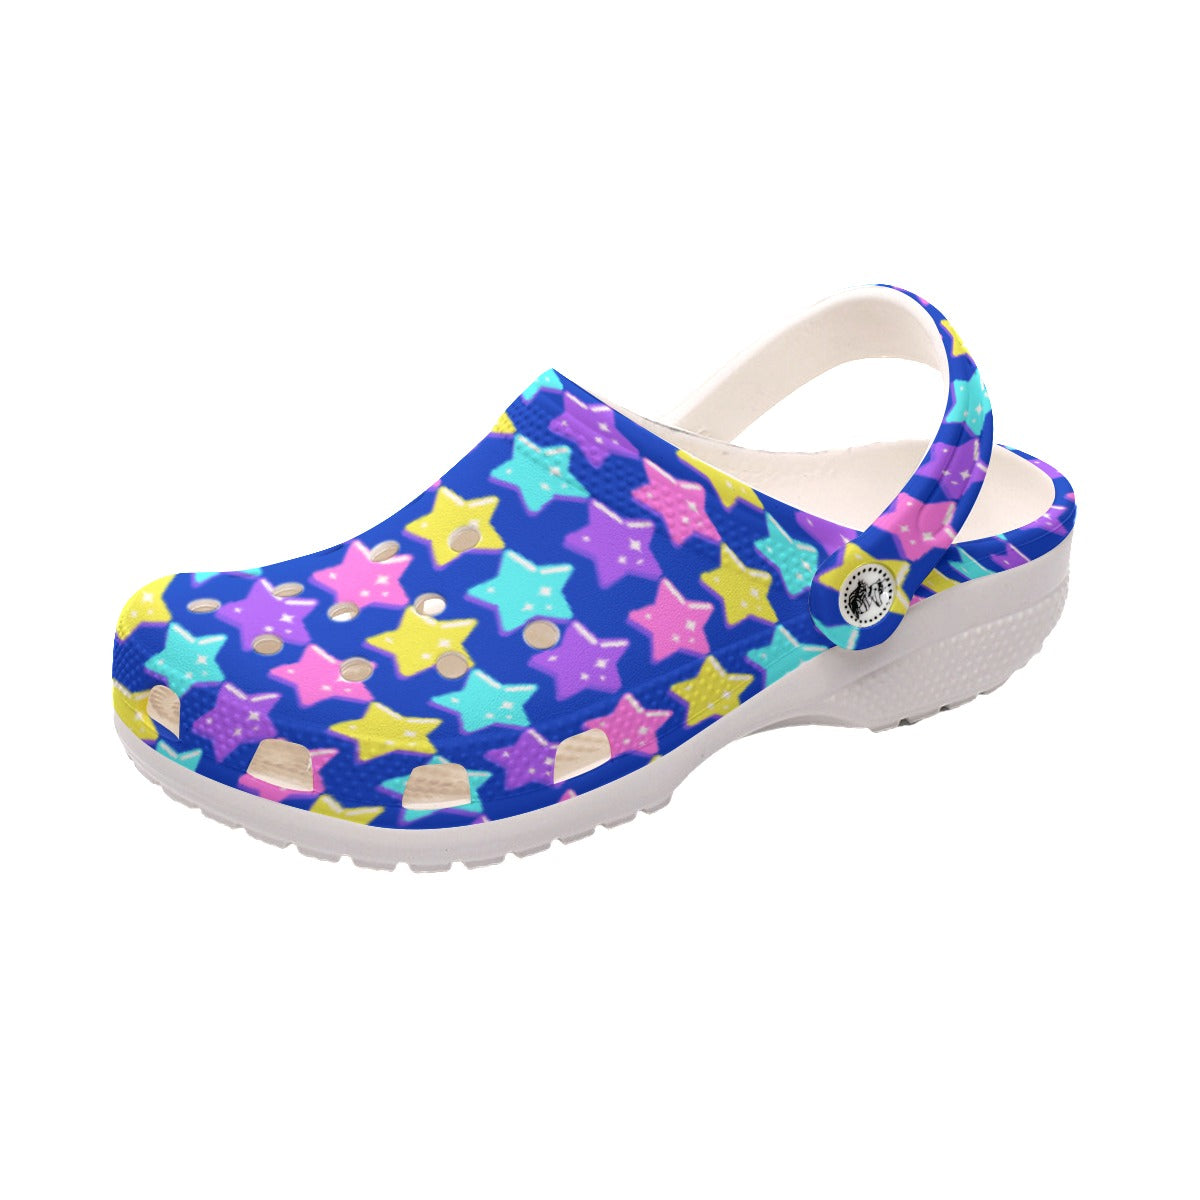 Electric Star Wave Navy Blue Classic Clogs Women's Shoes